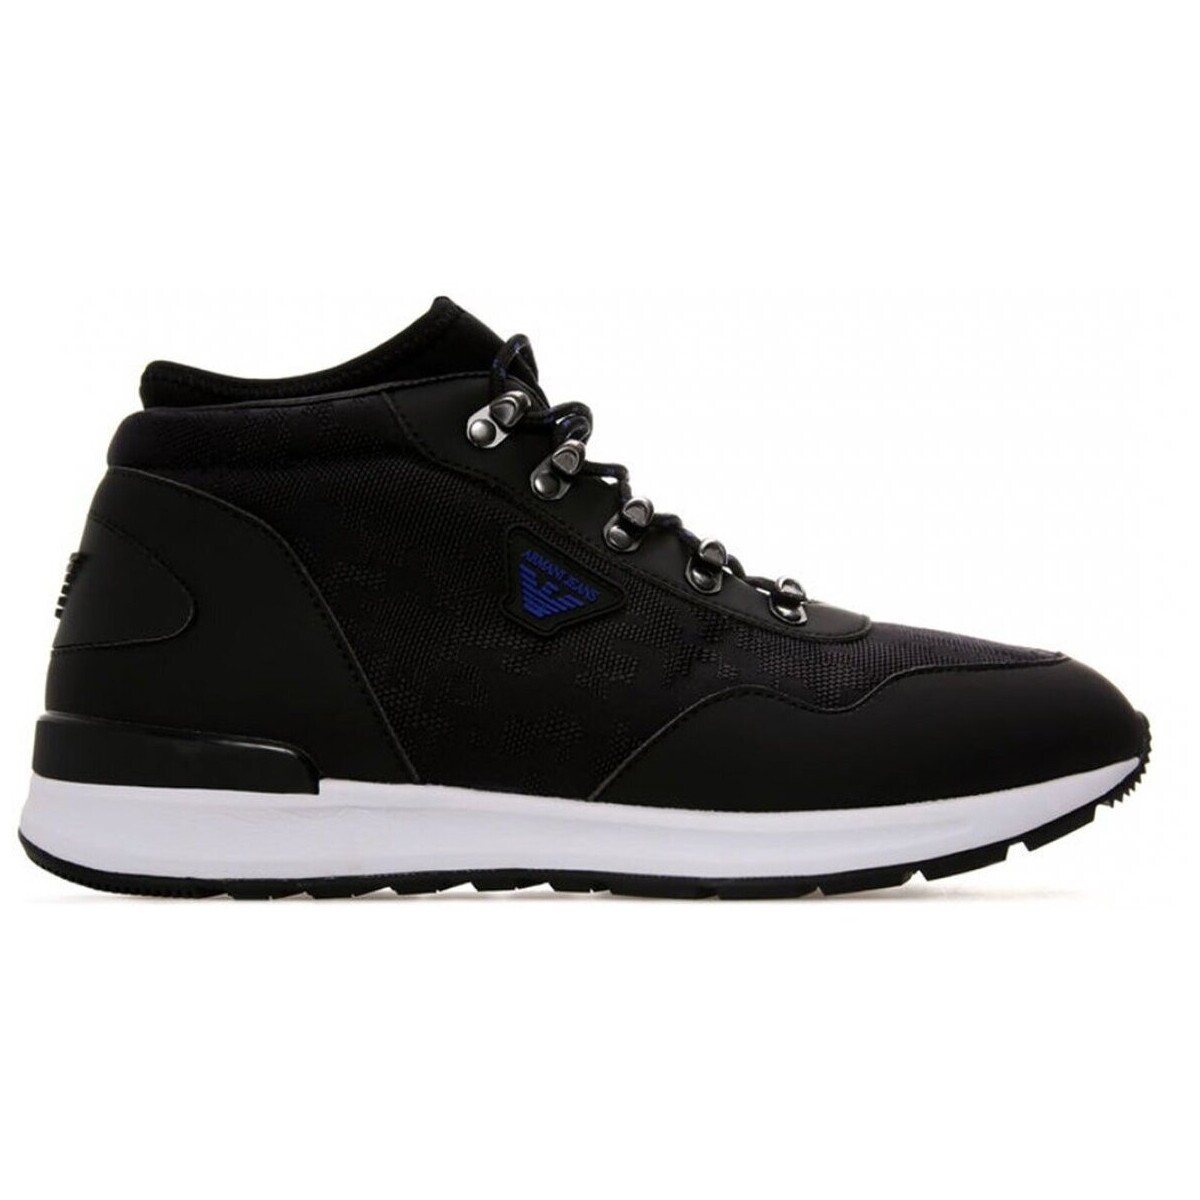 Xαμηλά Sneakers Armani jeans 935125 7A408